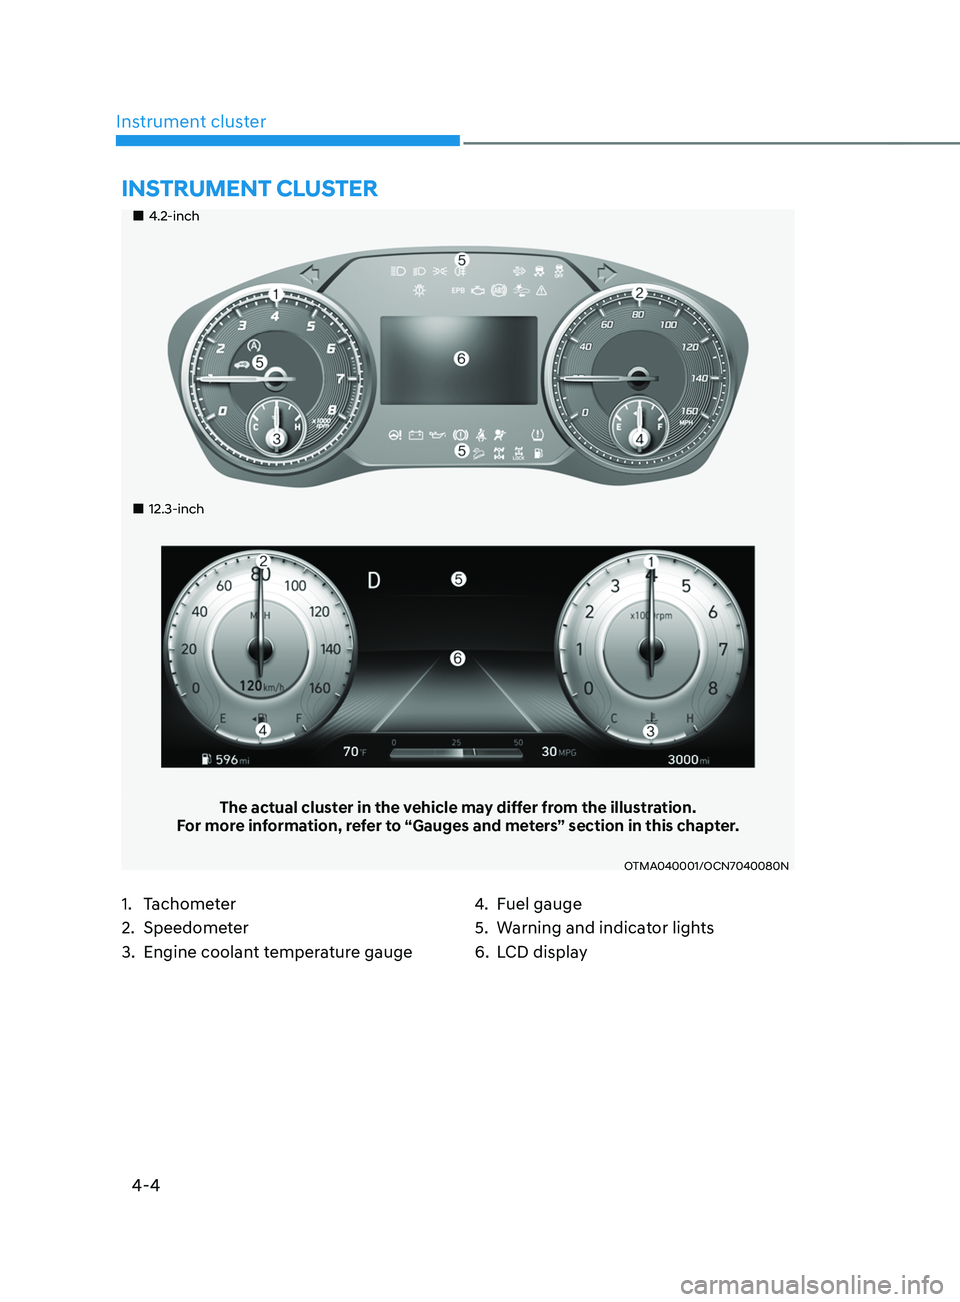 HYUNDAI SANTA FE CALLIGRAPHY 2021  Owners Manual 4-4
Instrument cluster
„„4.2-inch
„„12.3-inch
The actual cluster in the vehicle may differ from the illustration.
For more information, refer to “Gauges and meters” section in 